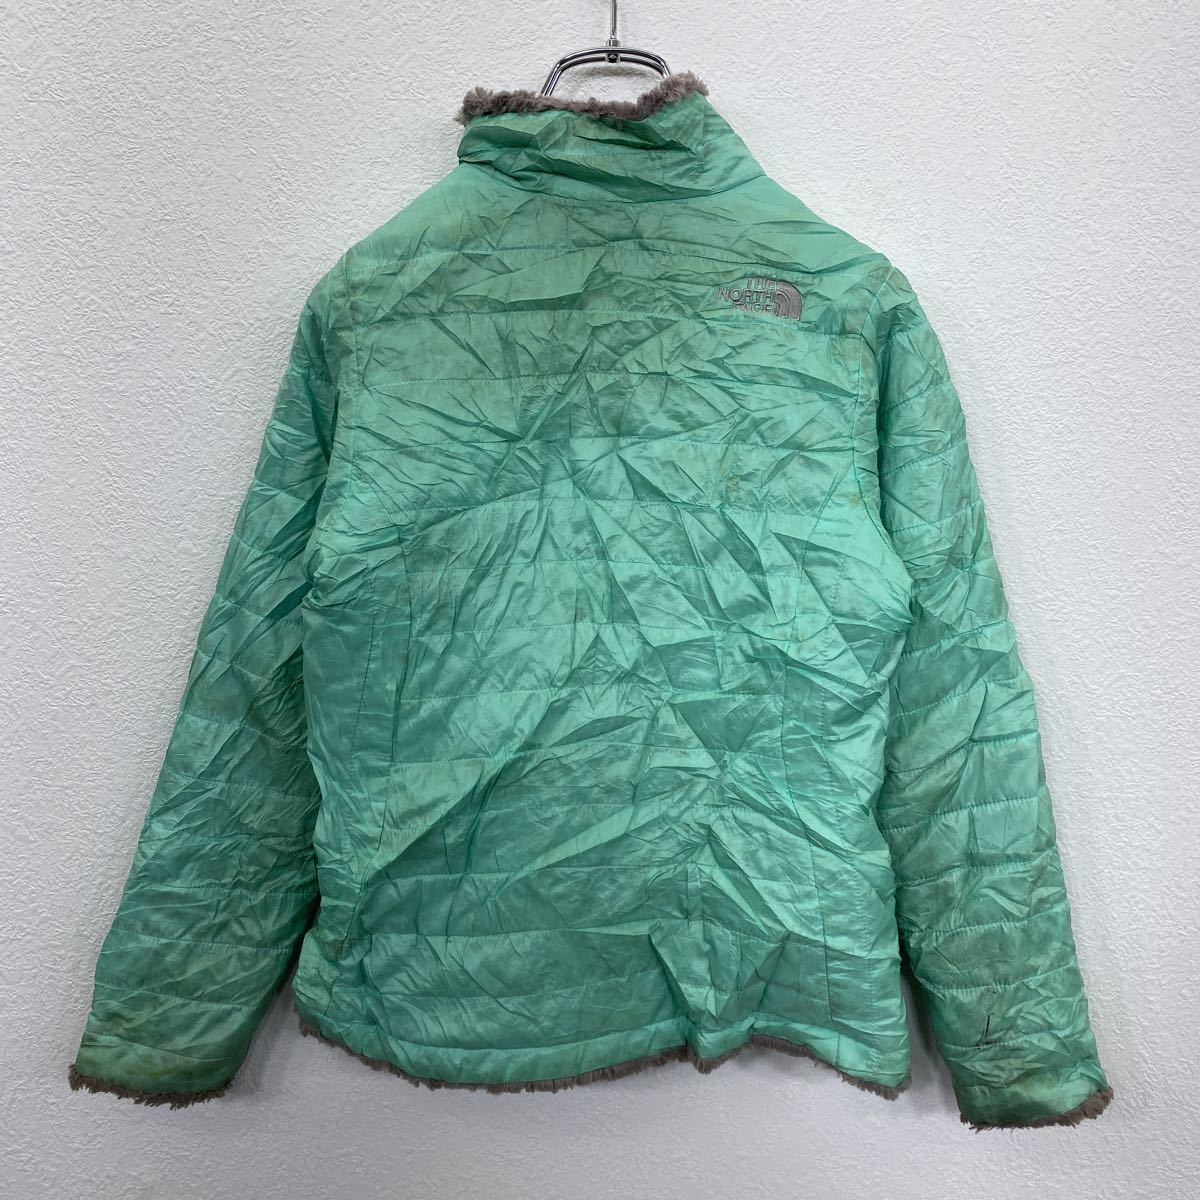 THE NORTH FACE down jacket Kids M green North Face reverse side f lease outdoor Logo old clothes . America buying up t2202-4584